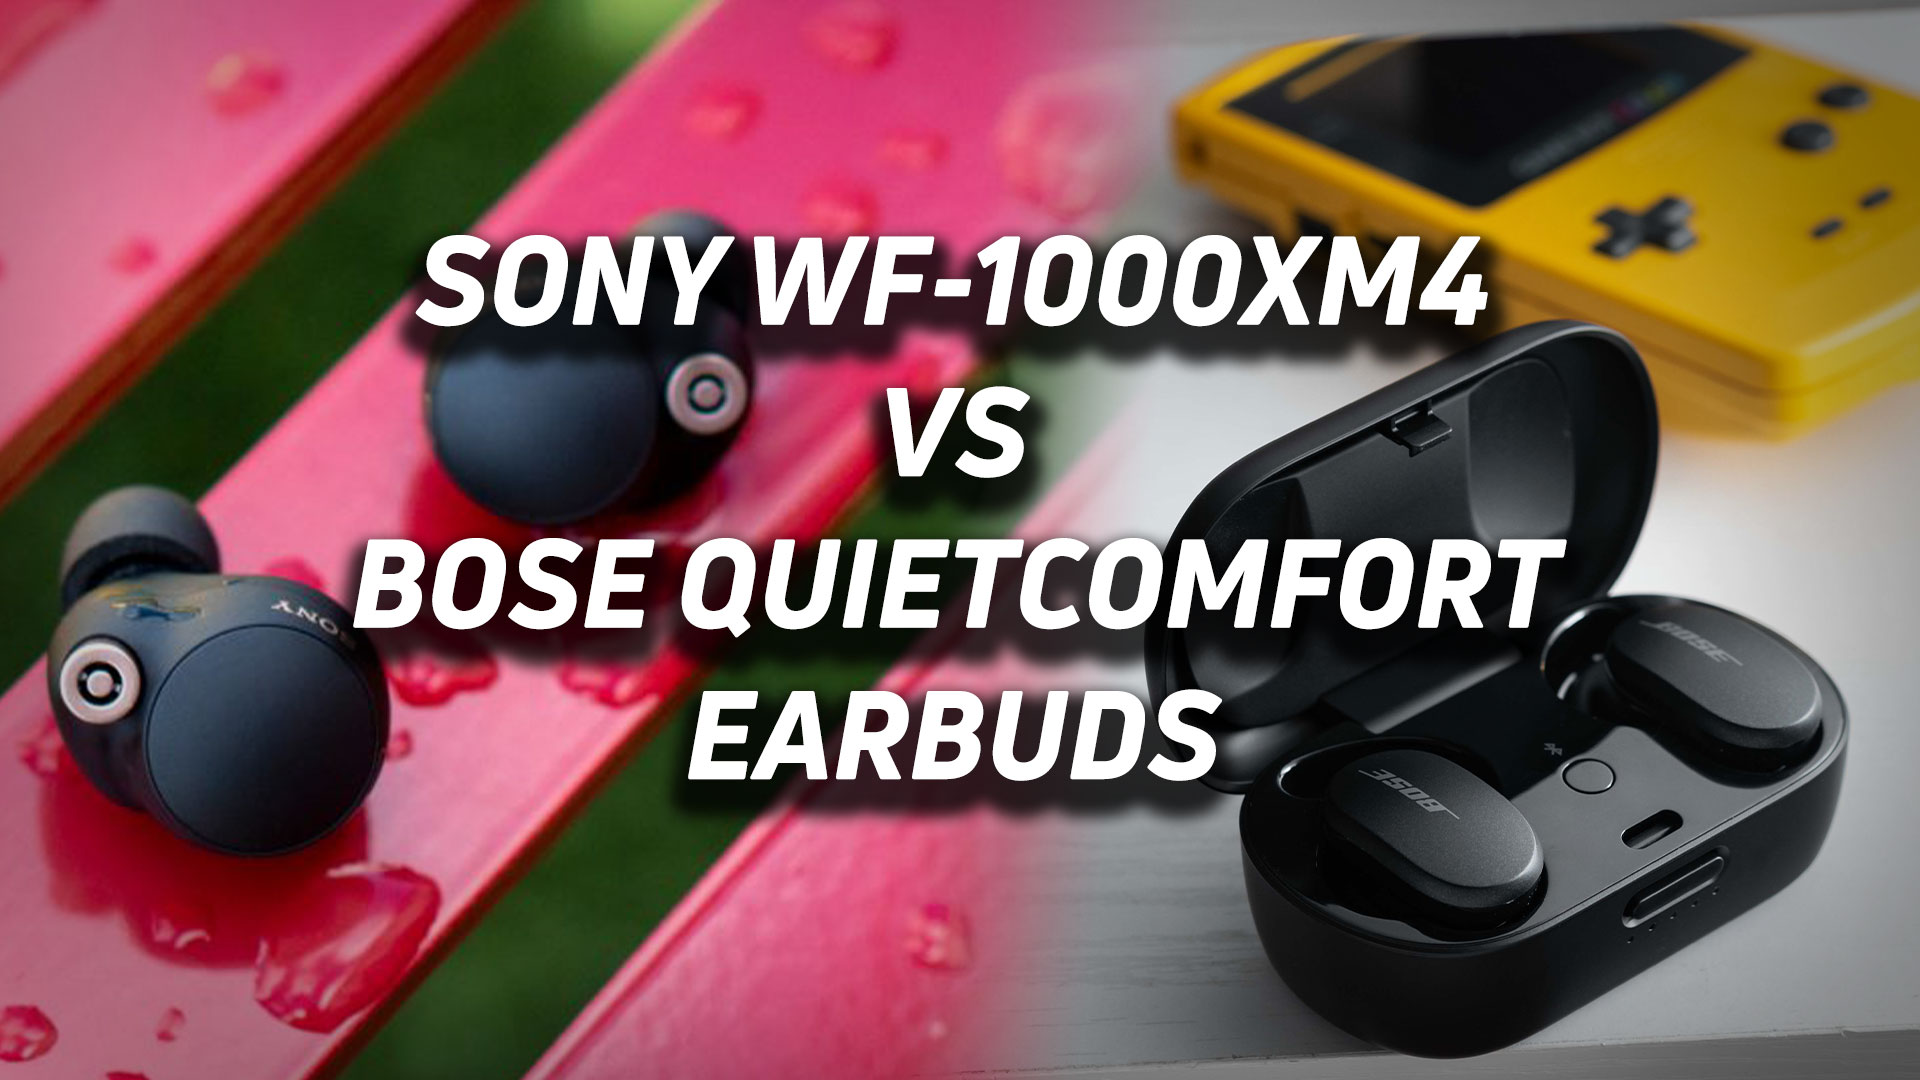 A blended image of the Sony WF-1000XM4 vs Bose QuietComfort Earbuds with versus text overlaid.